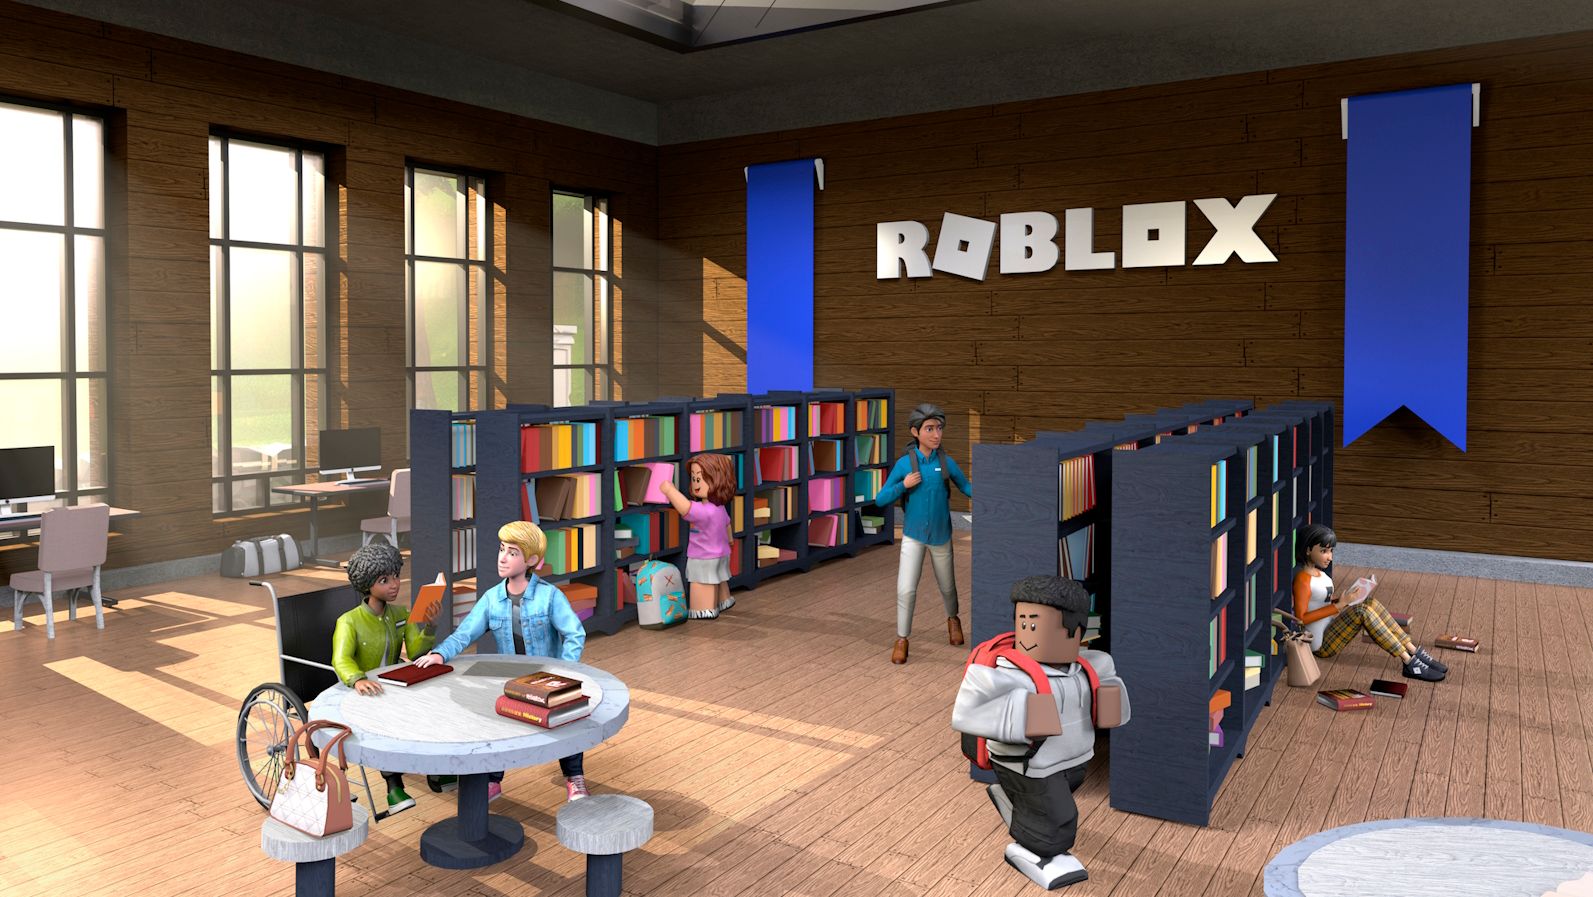 Roblox logo in background of animated library